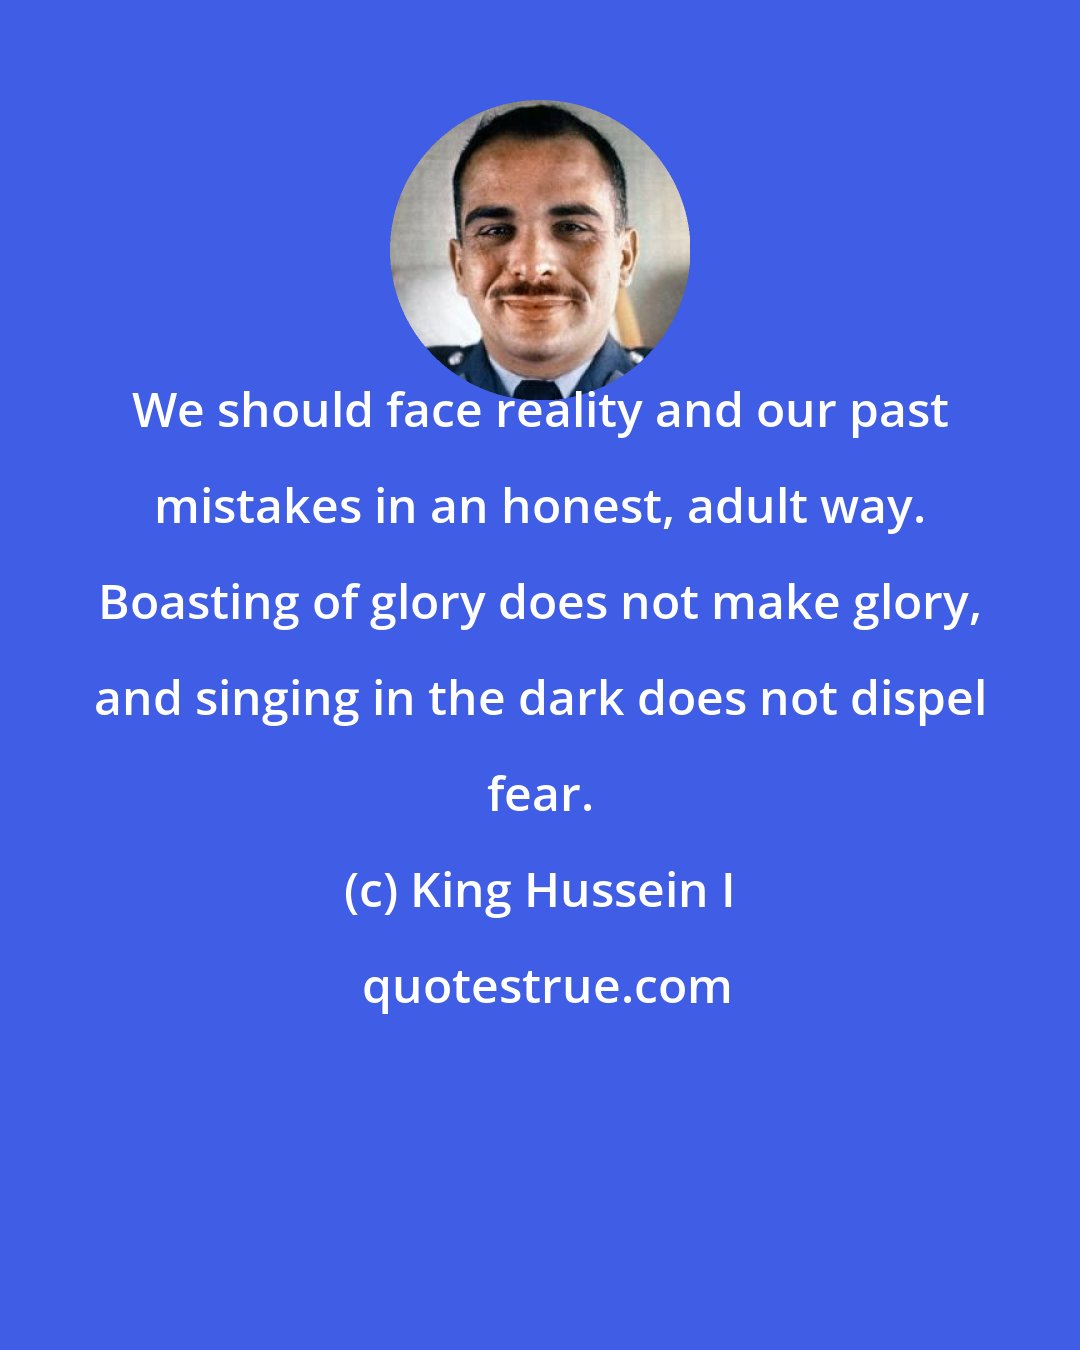 King Hussein I: We should face reality and our past mistakes in an honest, adult way. Boasting of glory does not make glory, and singing in the dark does not dispel fear.